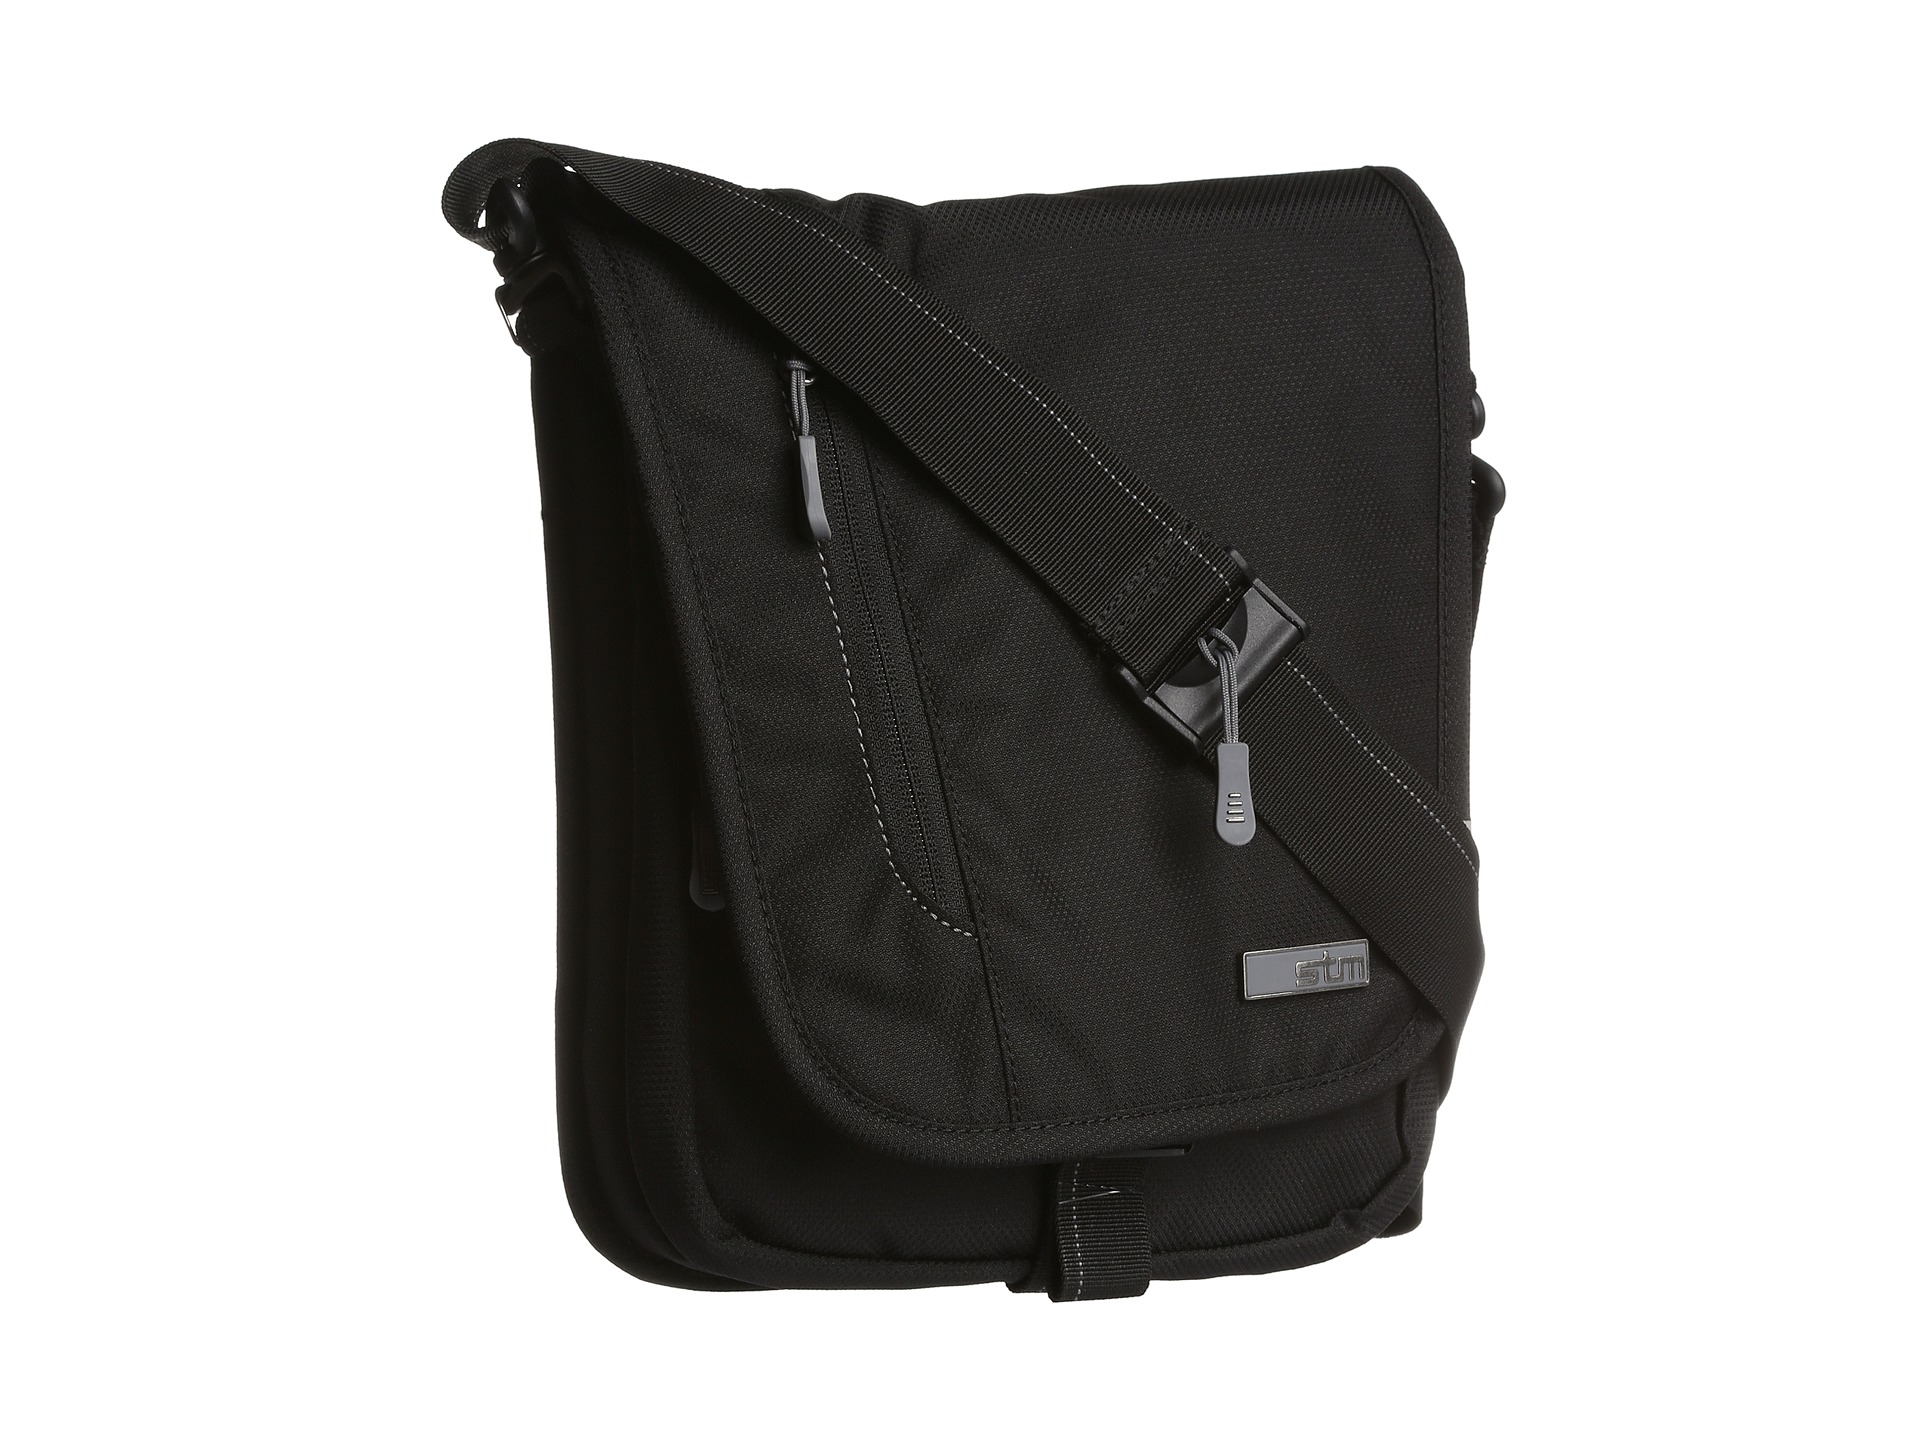 Stm Bags Linear Shoulder Bag For Ipad | Shipped Free at Zappos